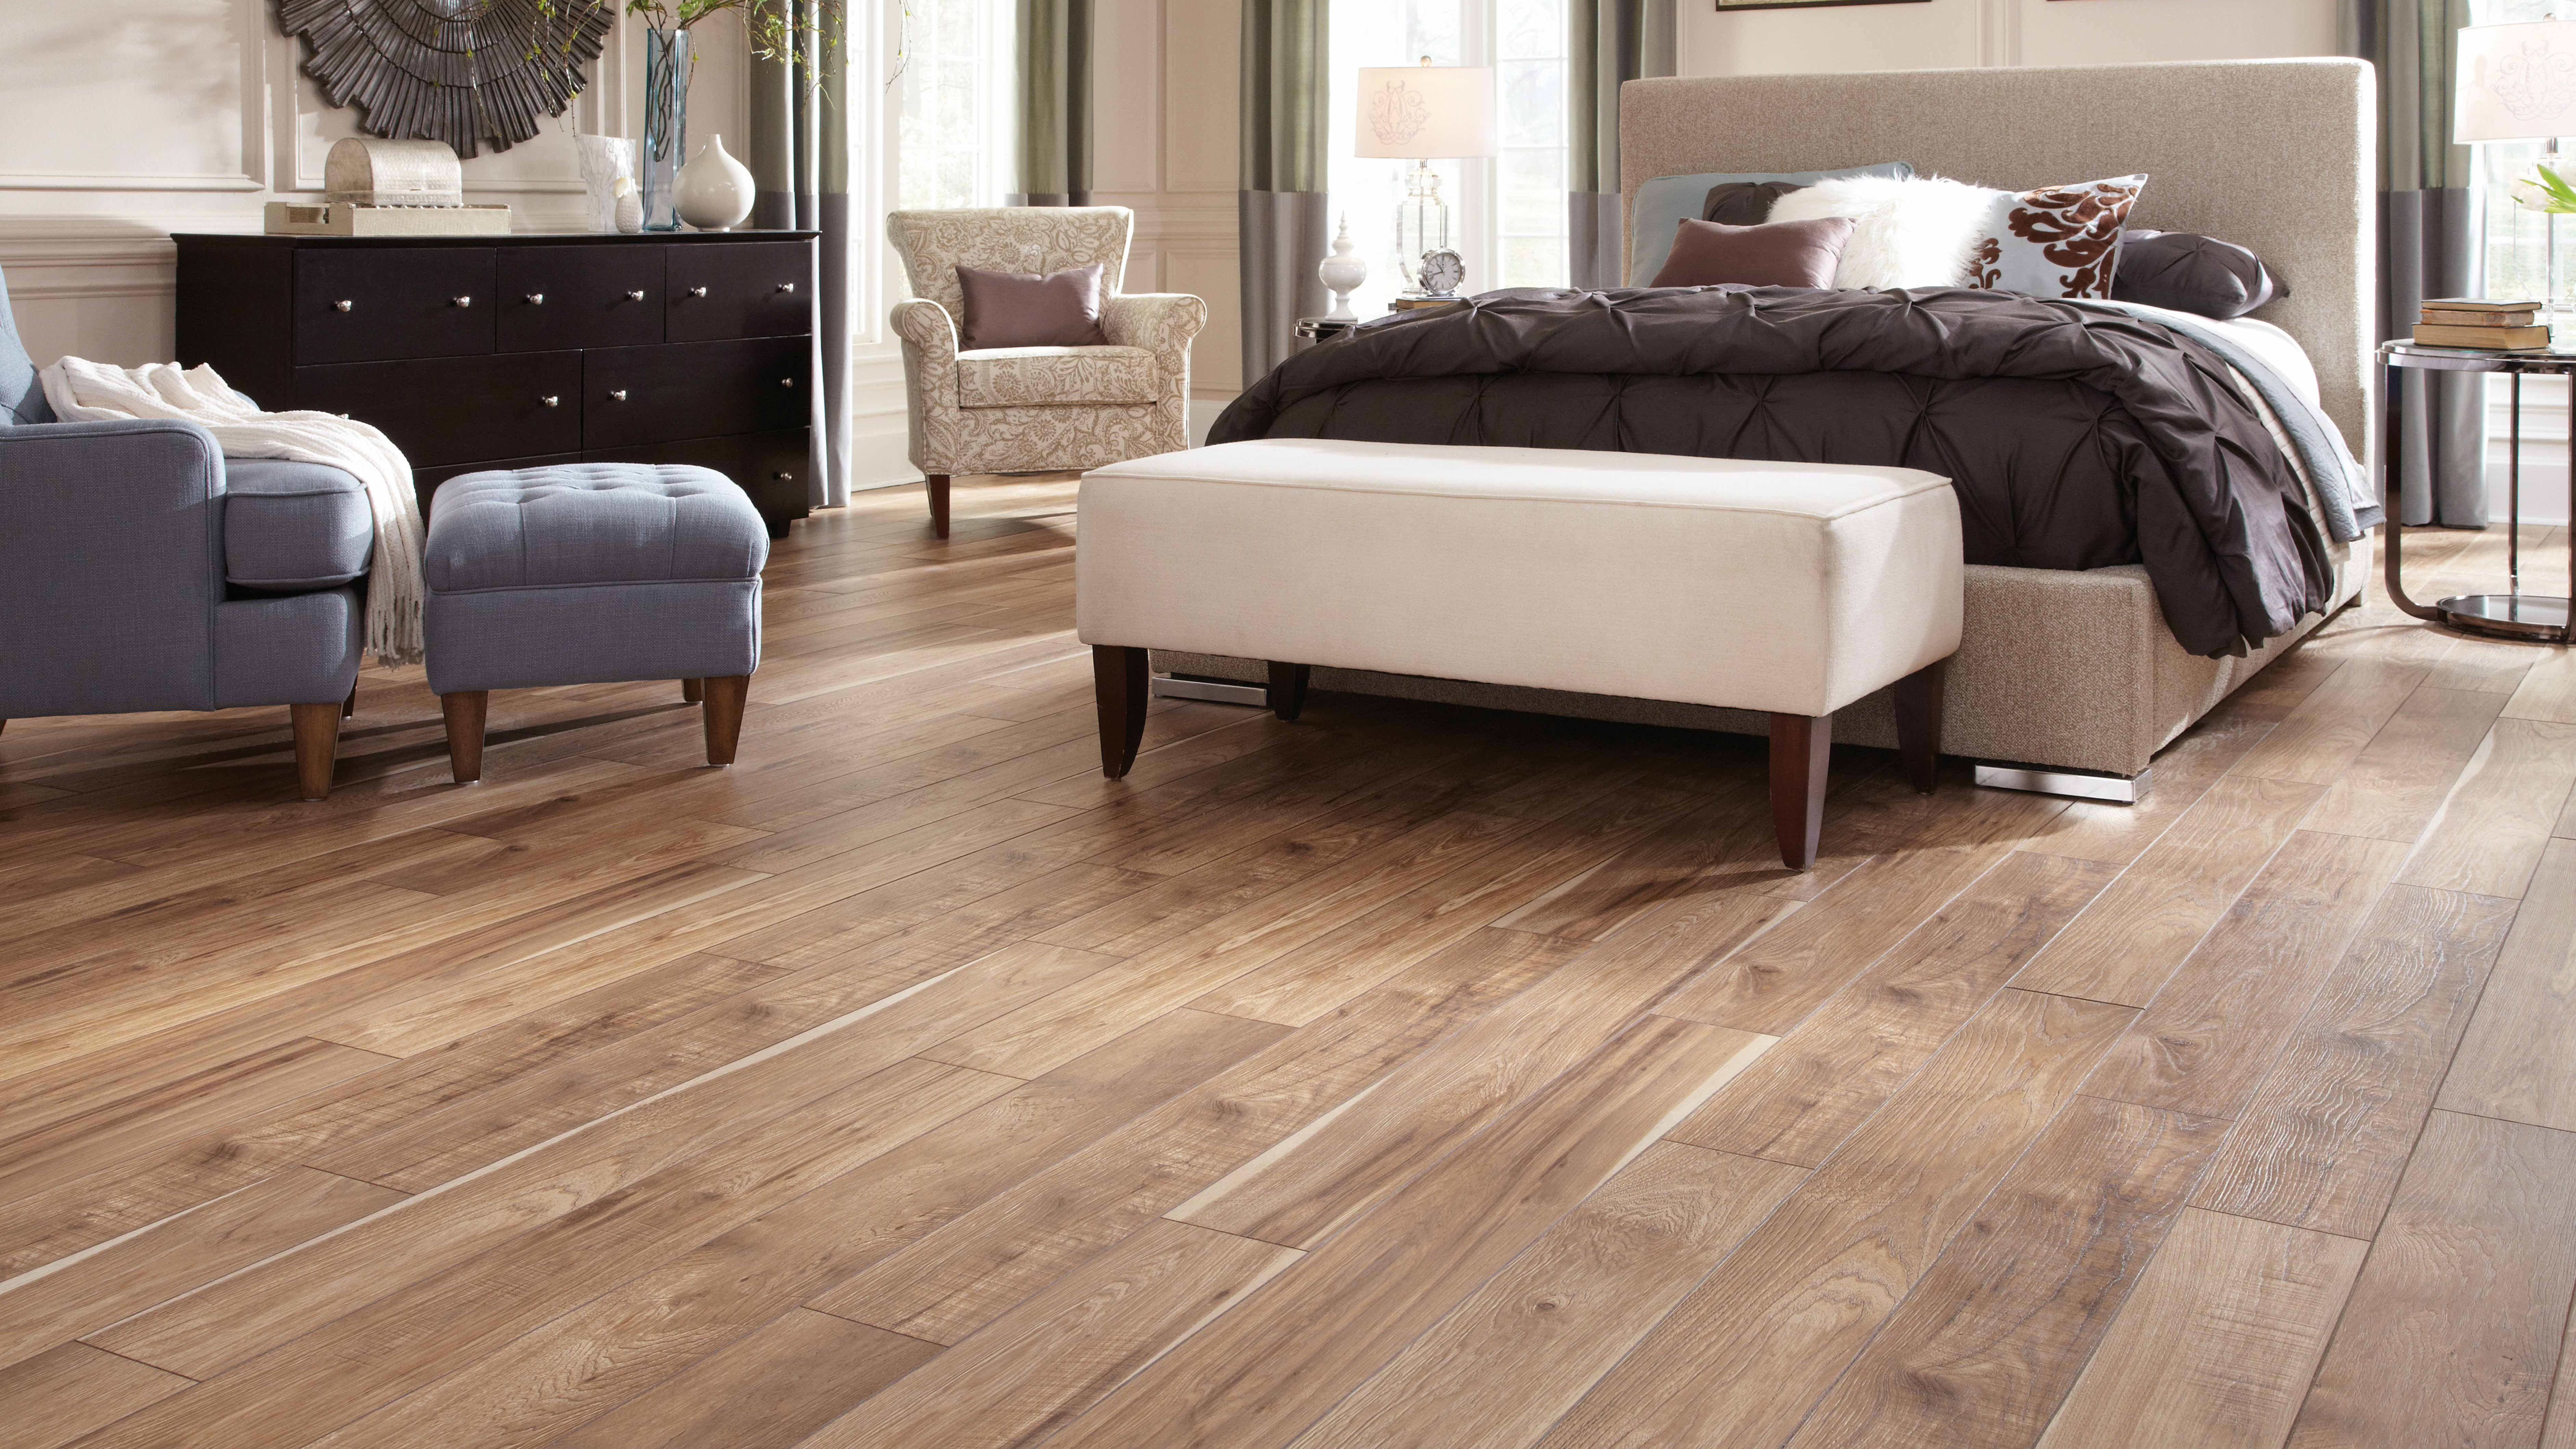 Laminate floors within a bedroom with a bedroom set and large chair 